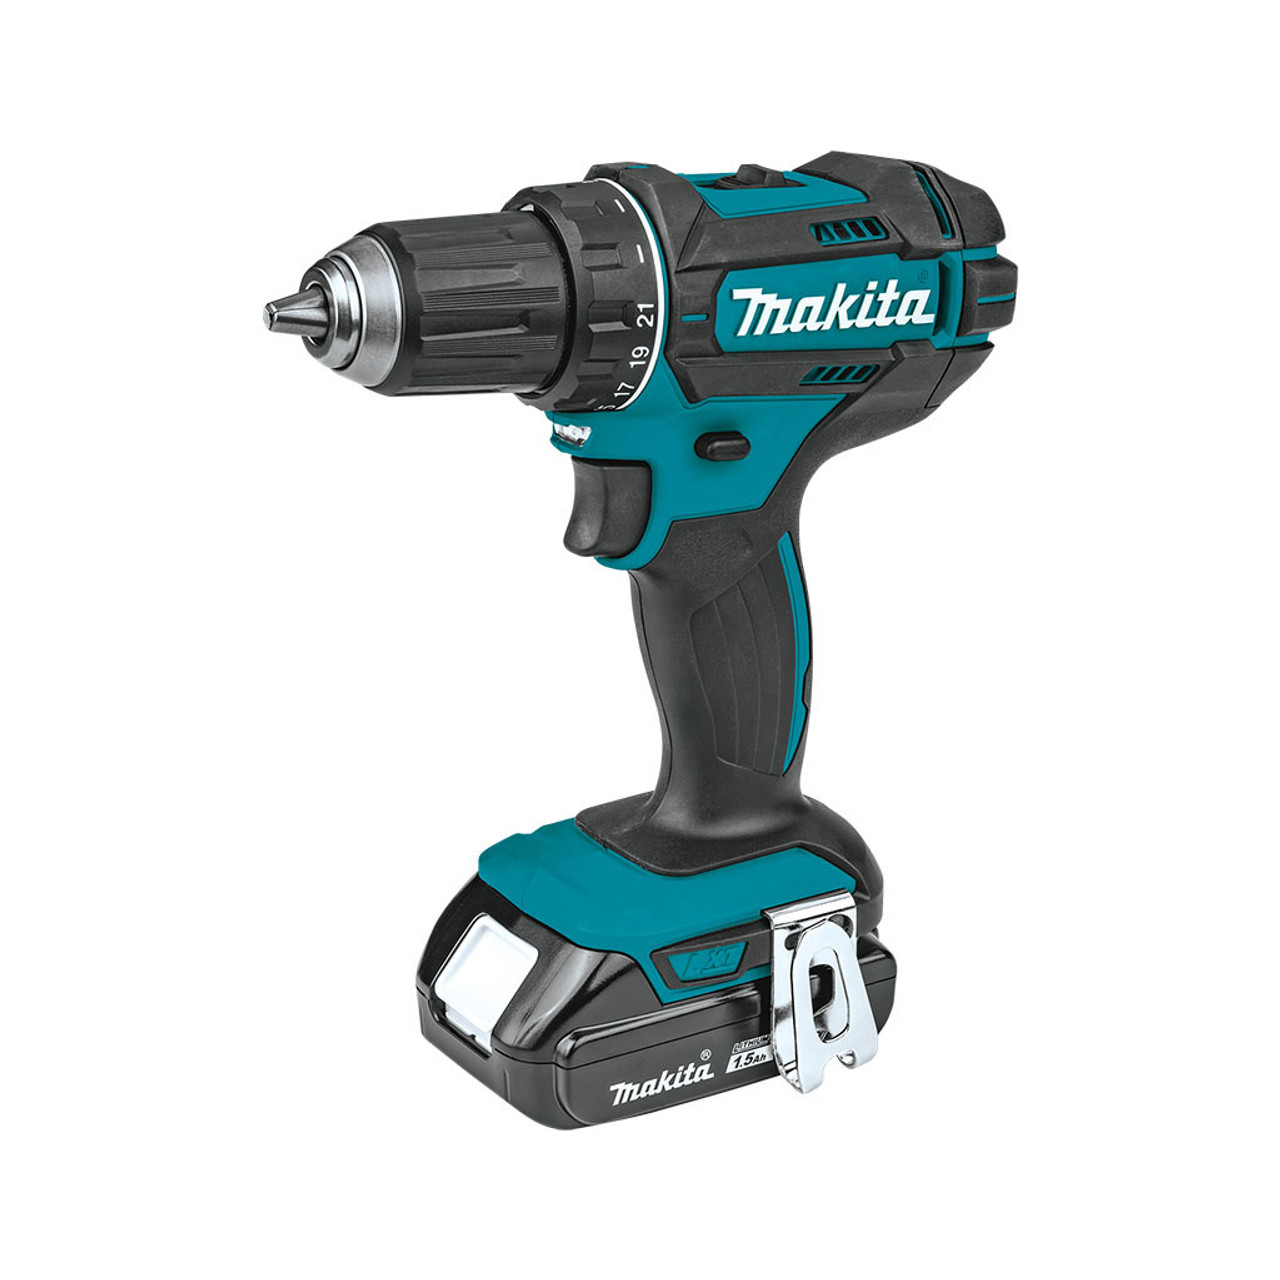 Makita 18V LXT Lithium-Ion Compact Cordless 1/2" Driver-Drill - Midwest Technology